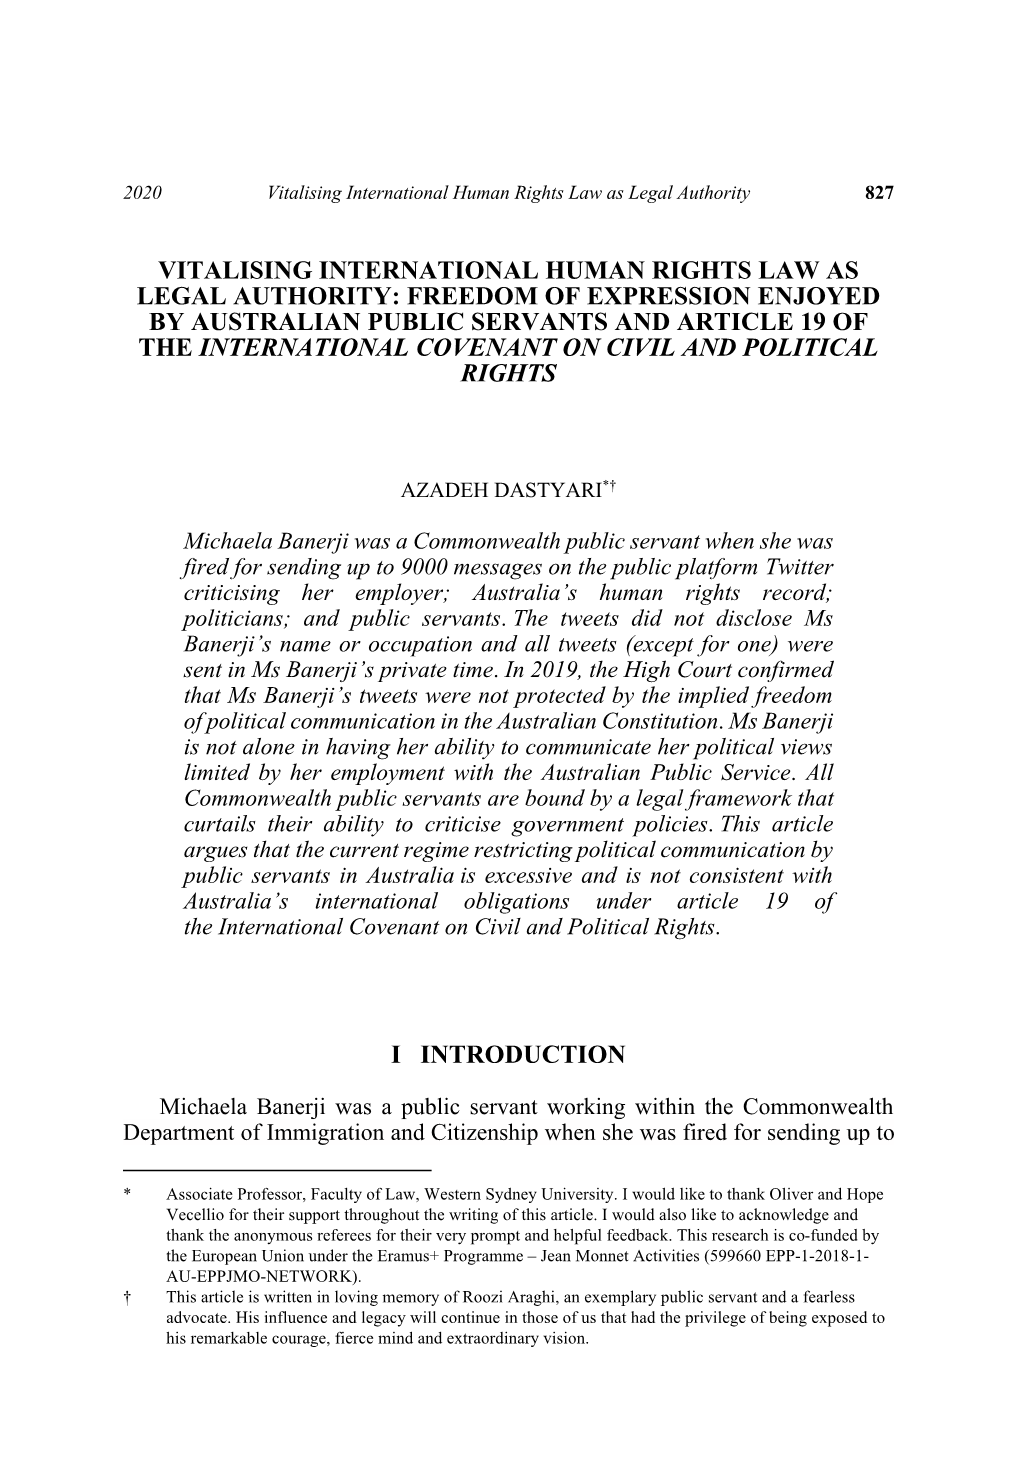 Vitalising International Human Rights Law As Legal Authority: Freedom of Expression Enjoyed by Australian Public Servants and Ar